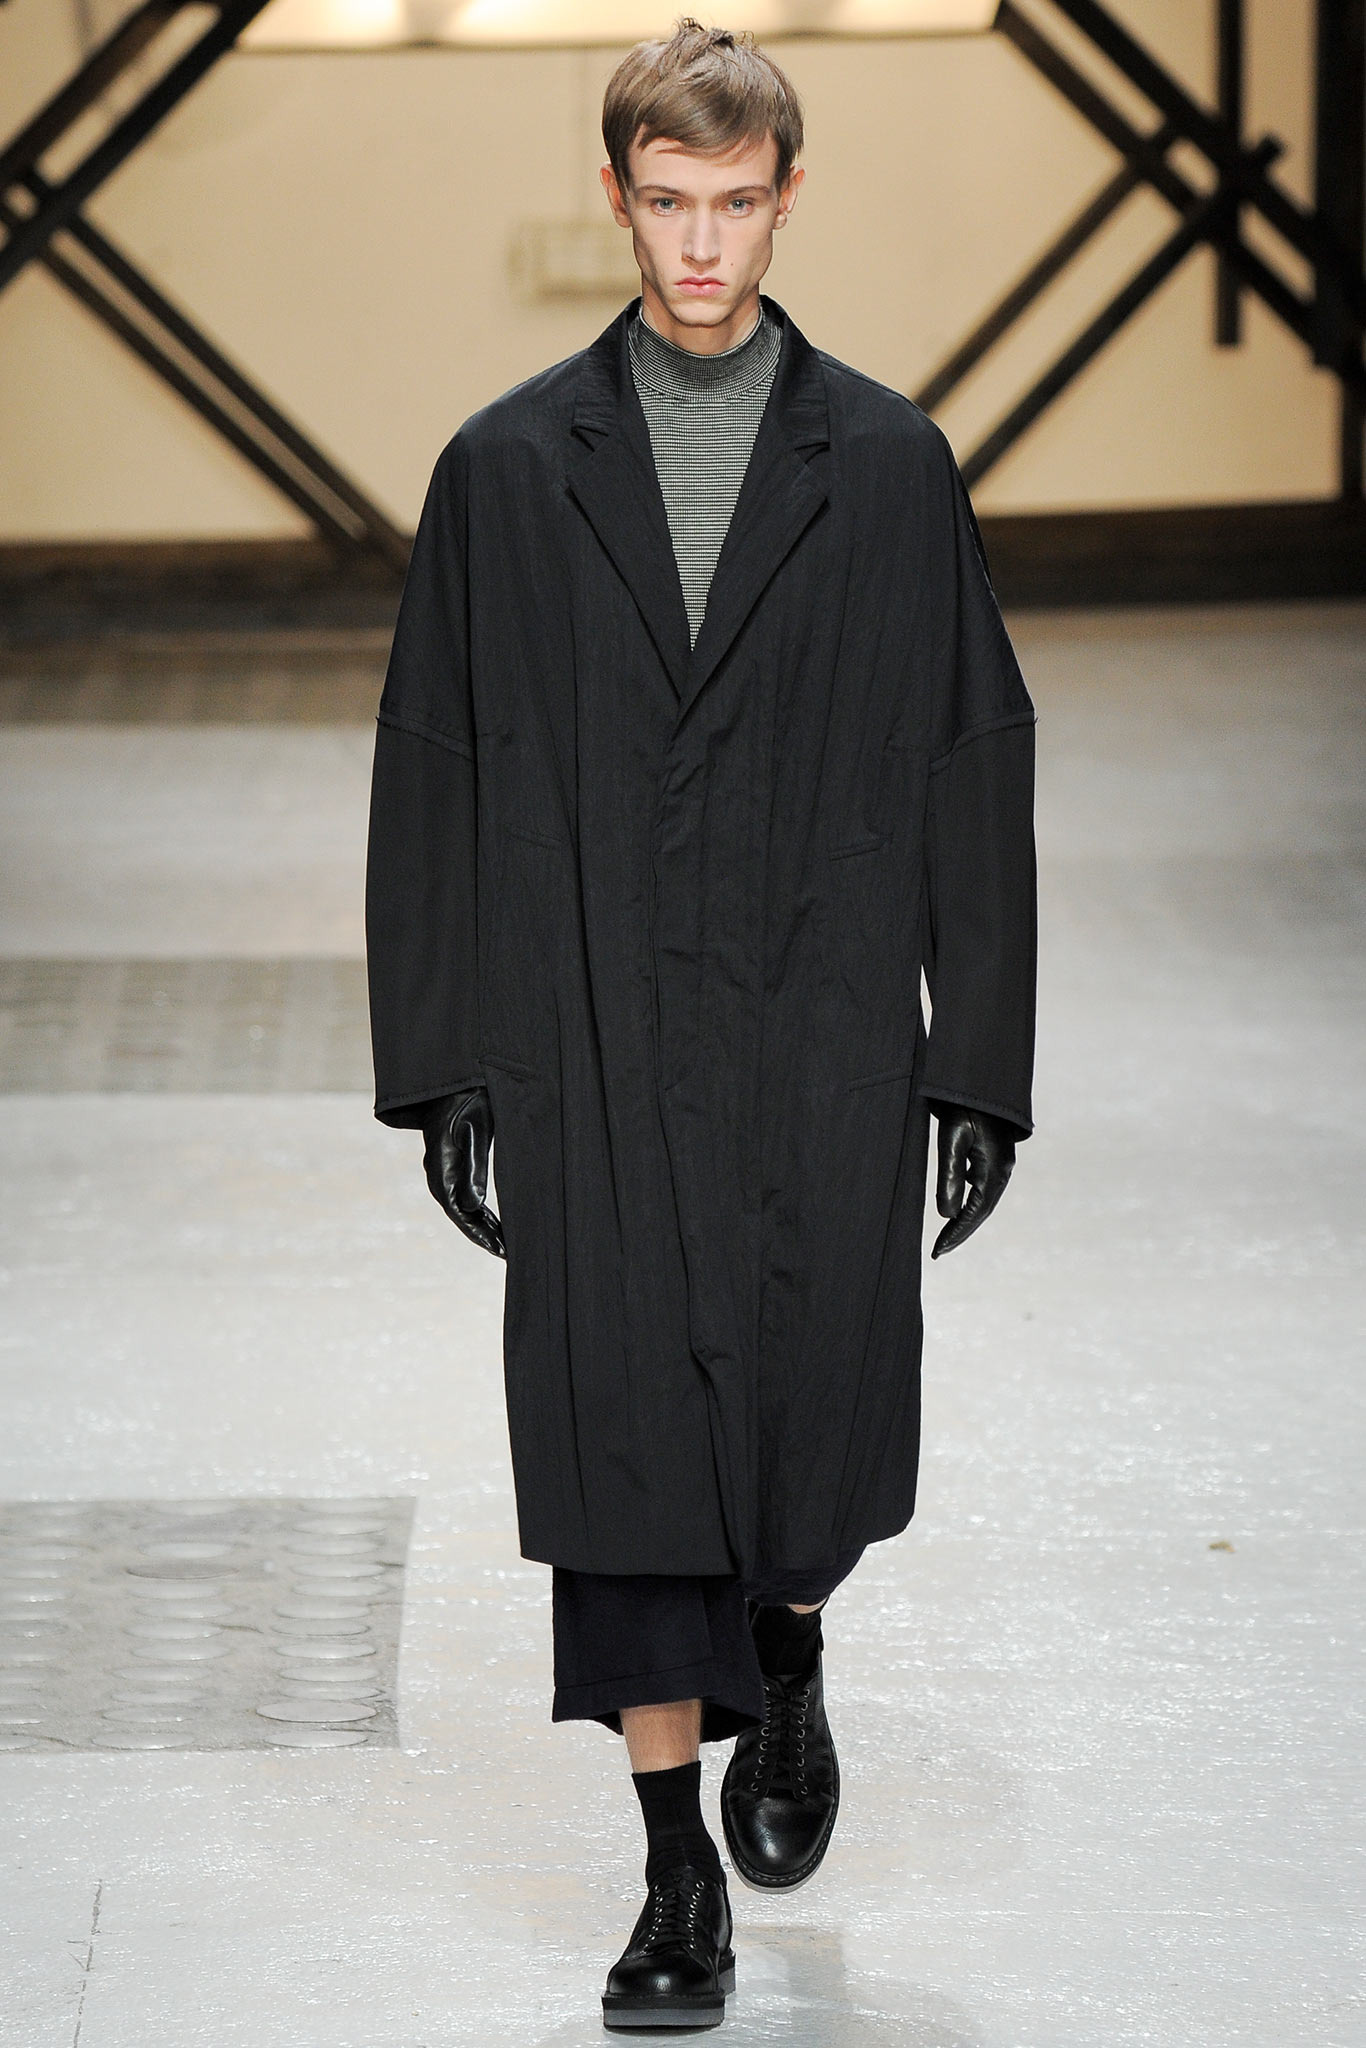 DAMIR DOMA : 2014 A/W COLLECTION - Chasseur Magazine